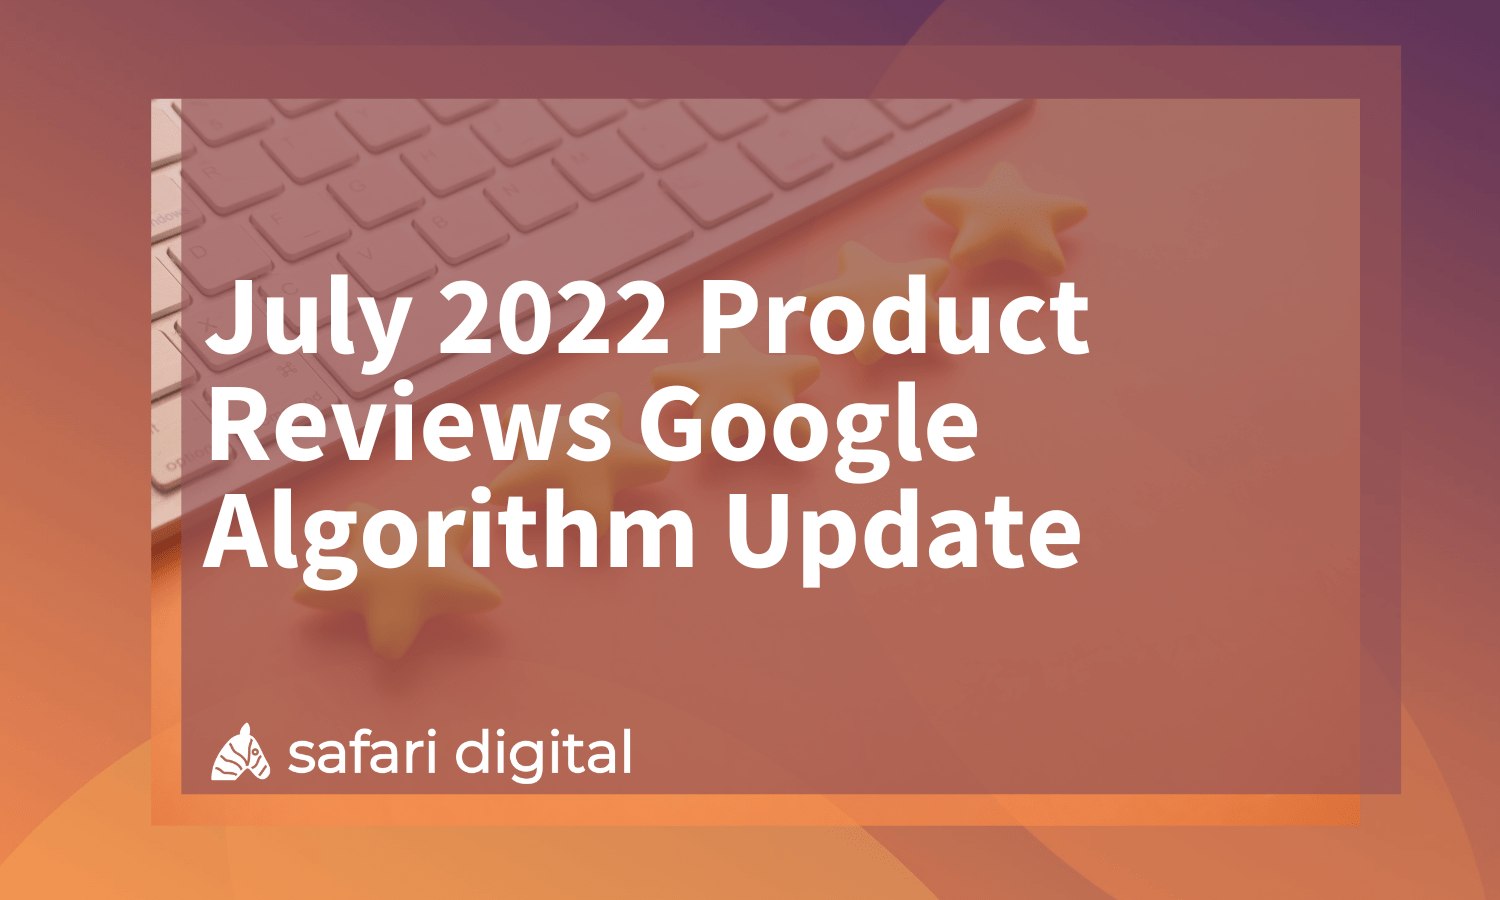 July 2022 Product Reviews Google Algorithm Update